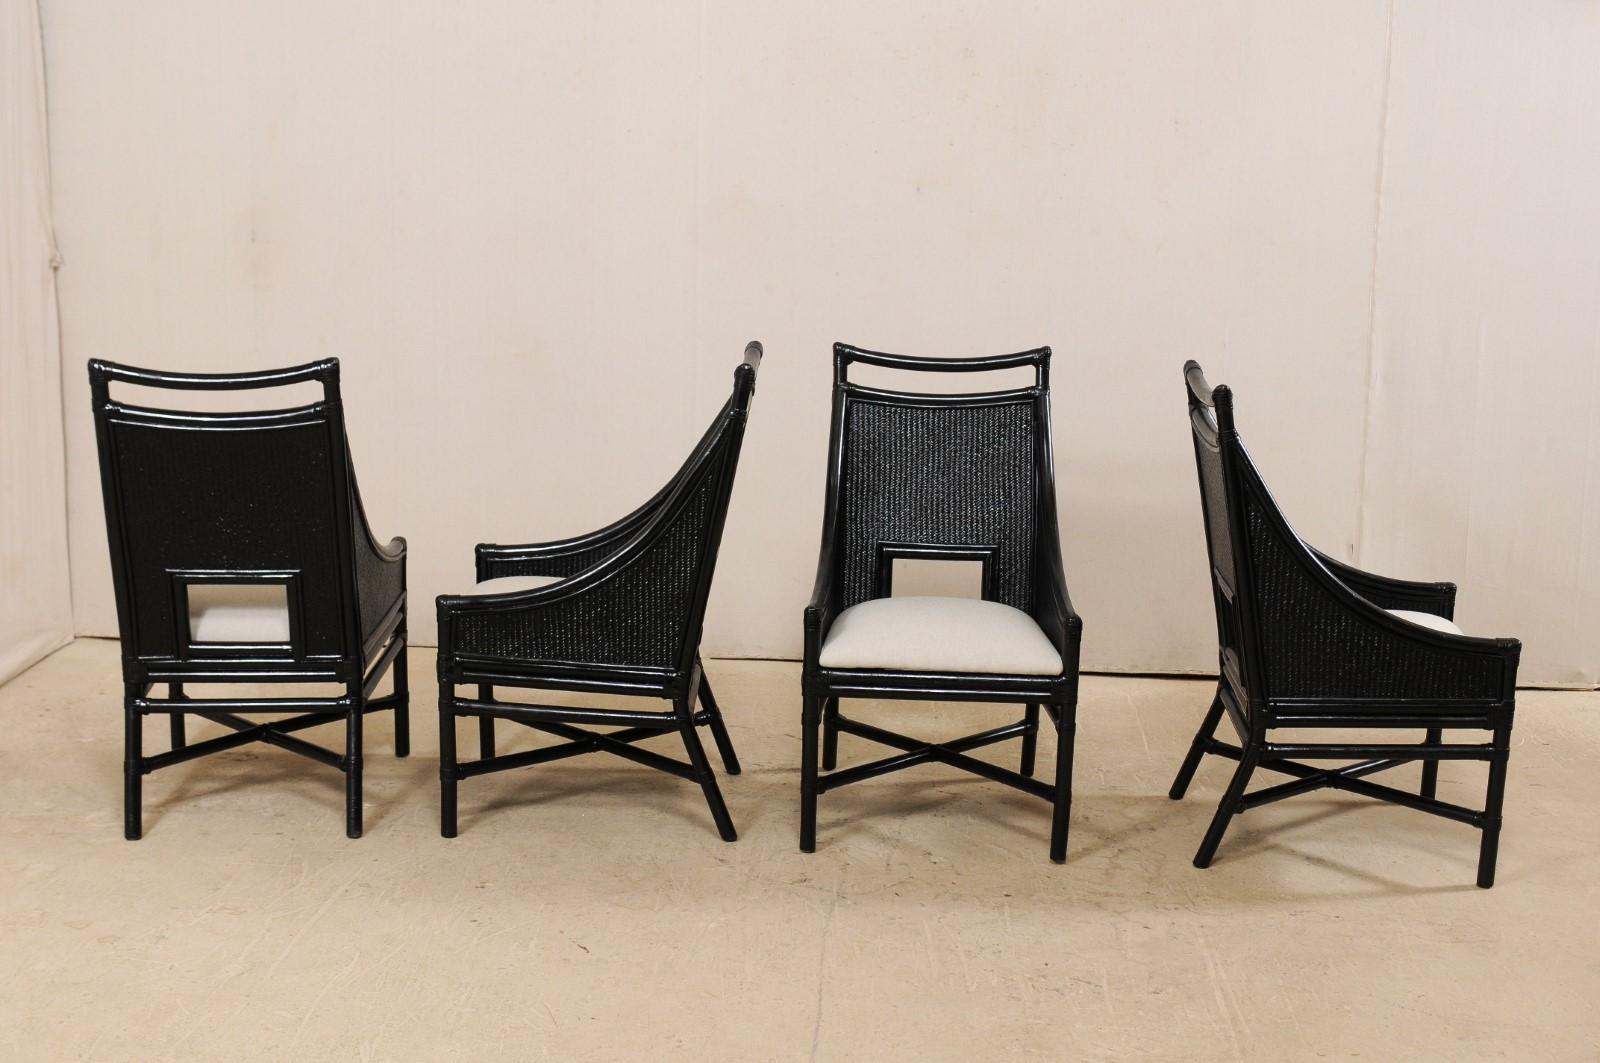 20th Century Set of Eight Vintage Painted Bamboo and Cane Chairs with Newly Upholstered Seats